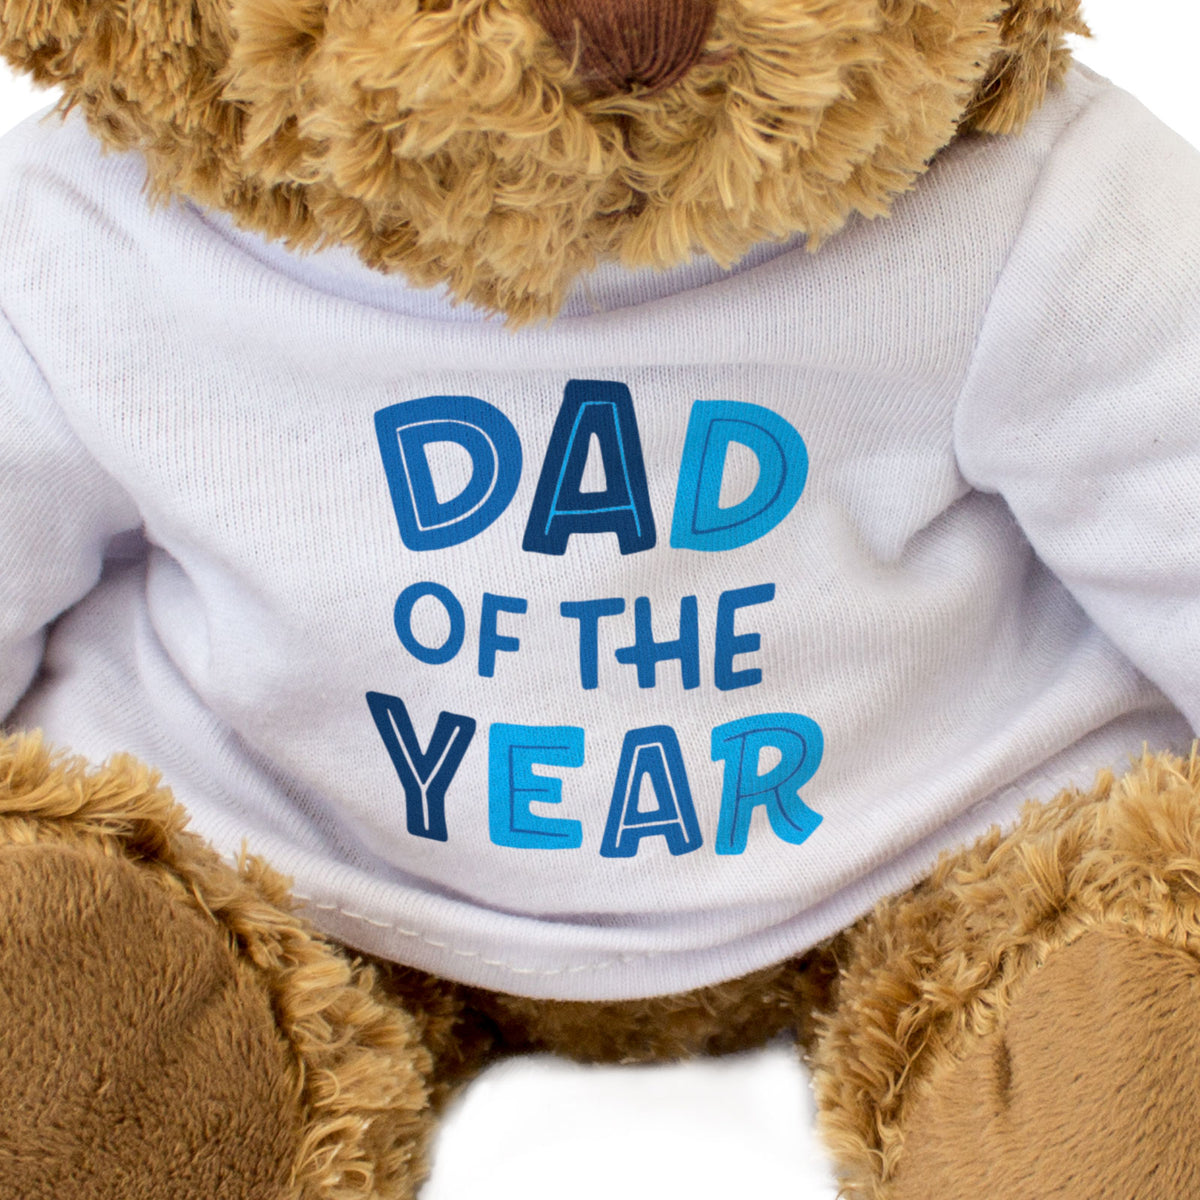 Dad Of The Year - Teddy Bear - Gift Present